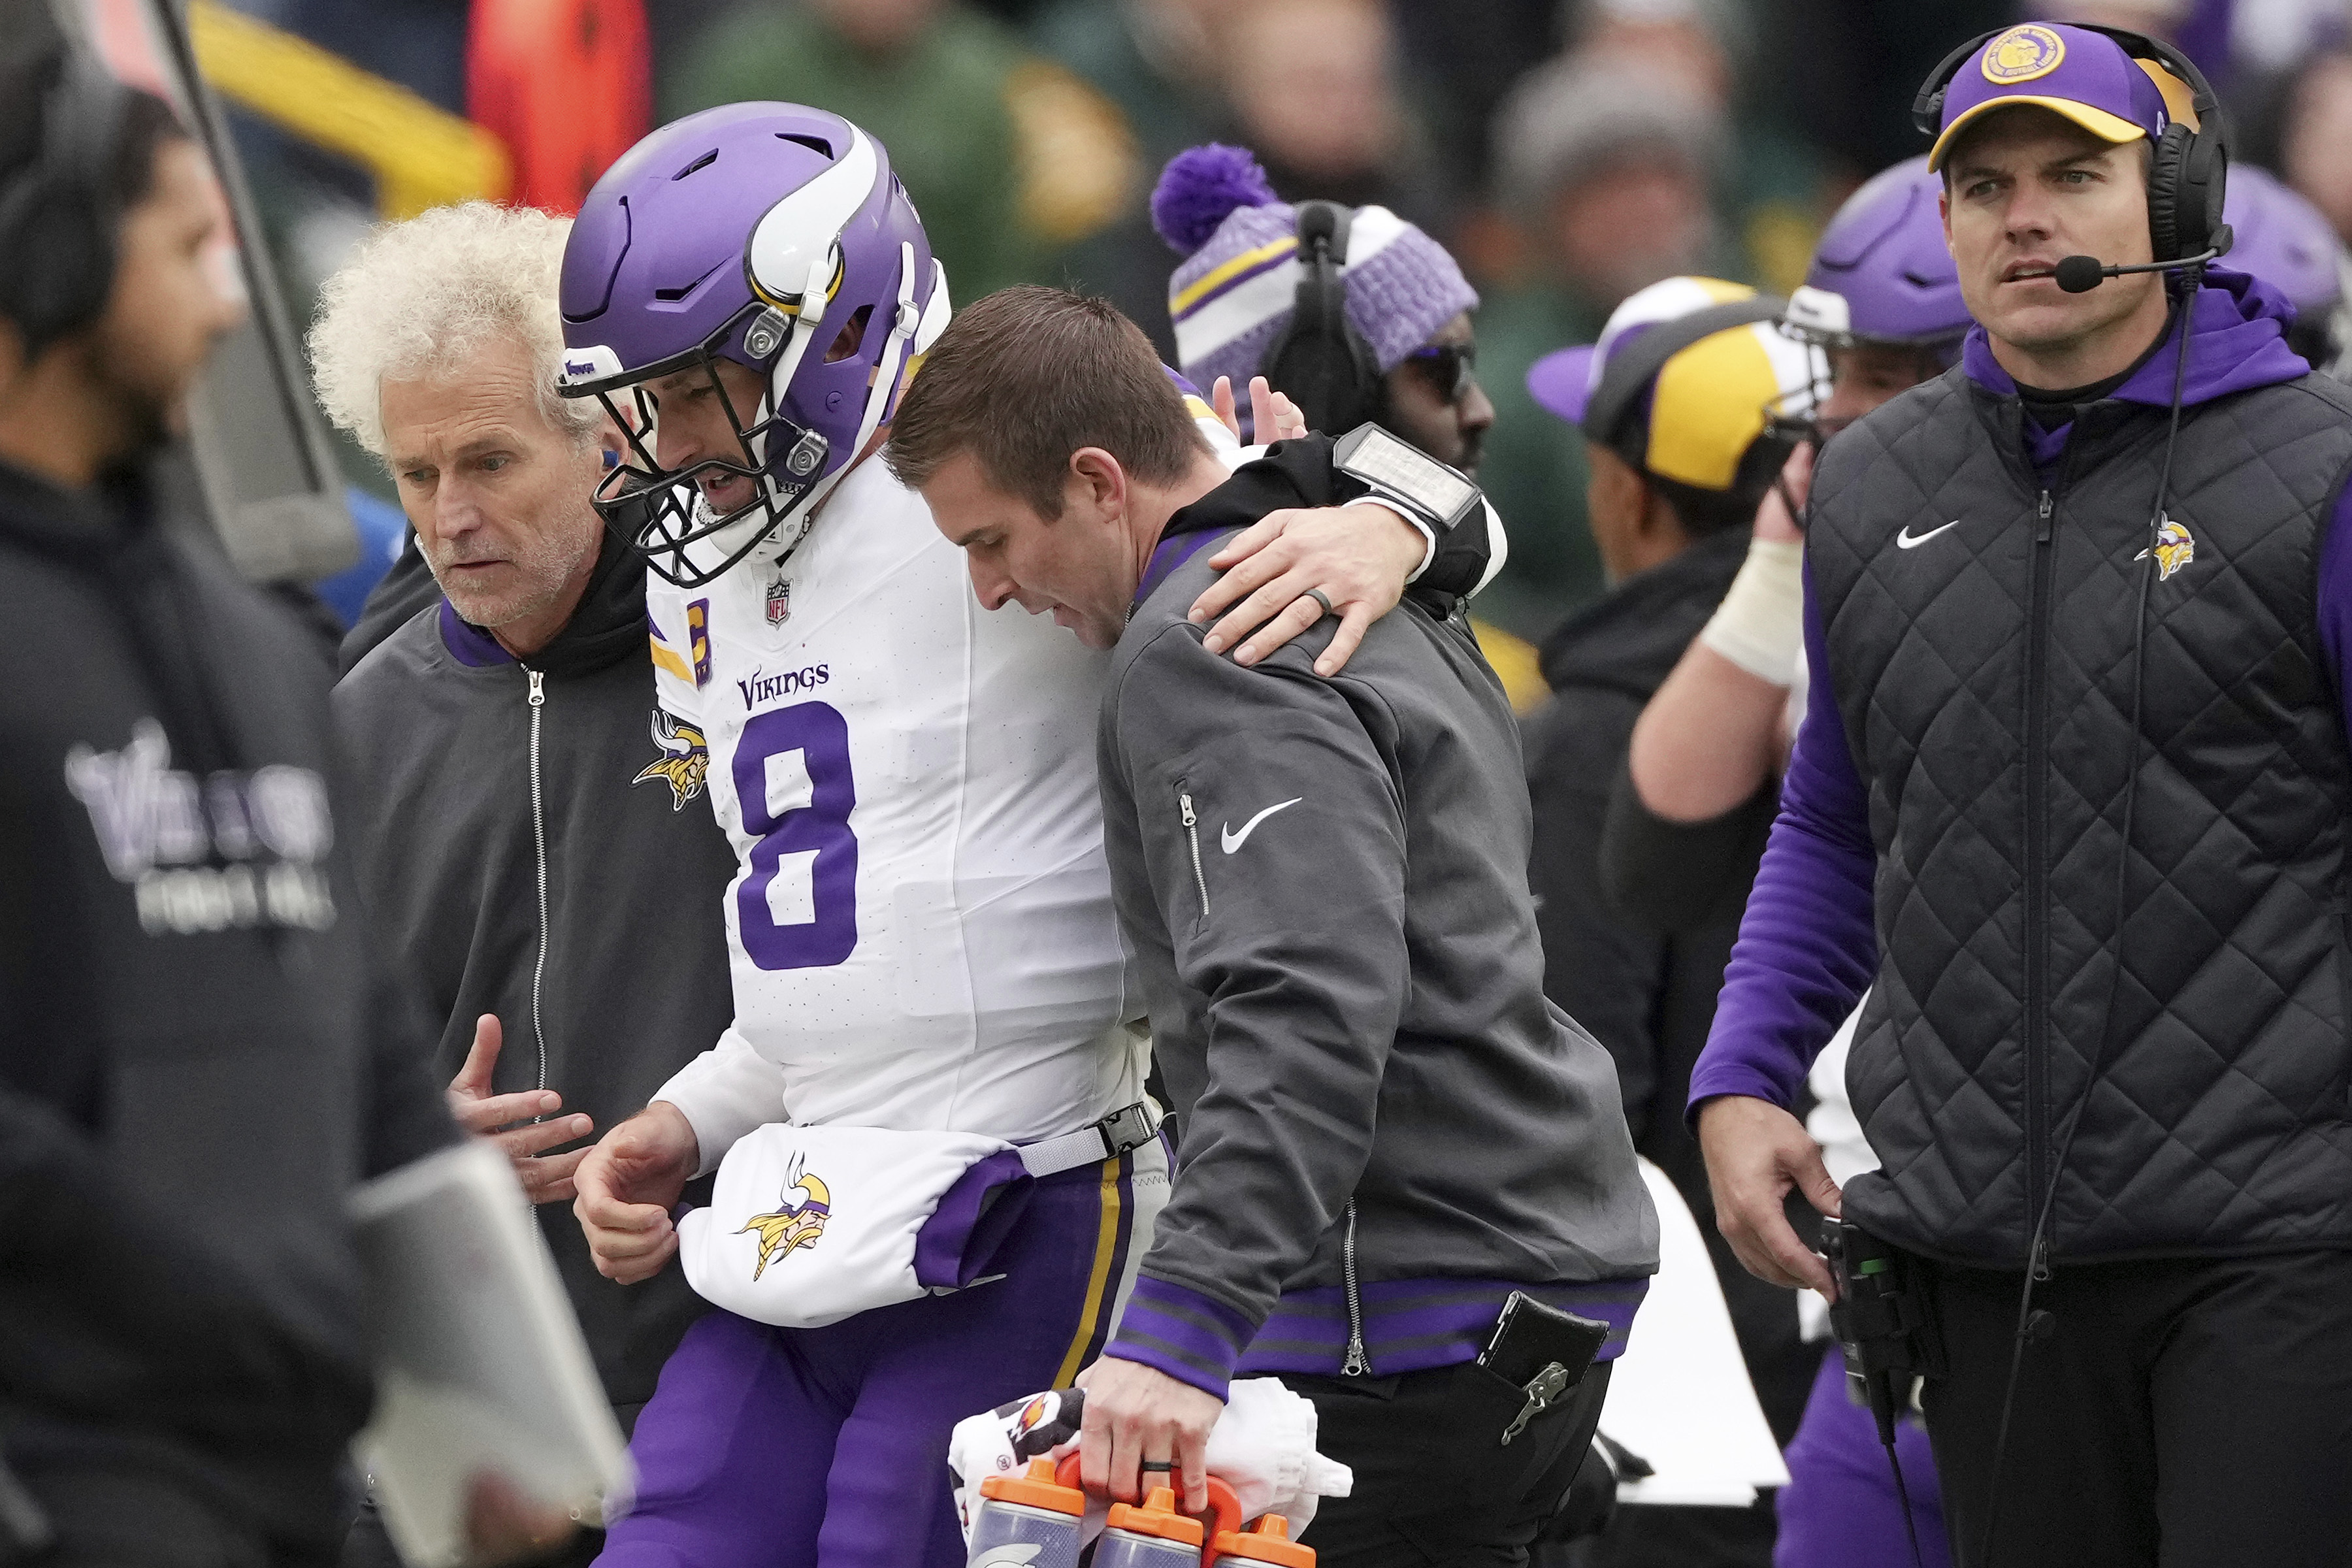 Vikings beat Packers 24-10 but lose Cousins to possible Achilles tendon injury | AP News